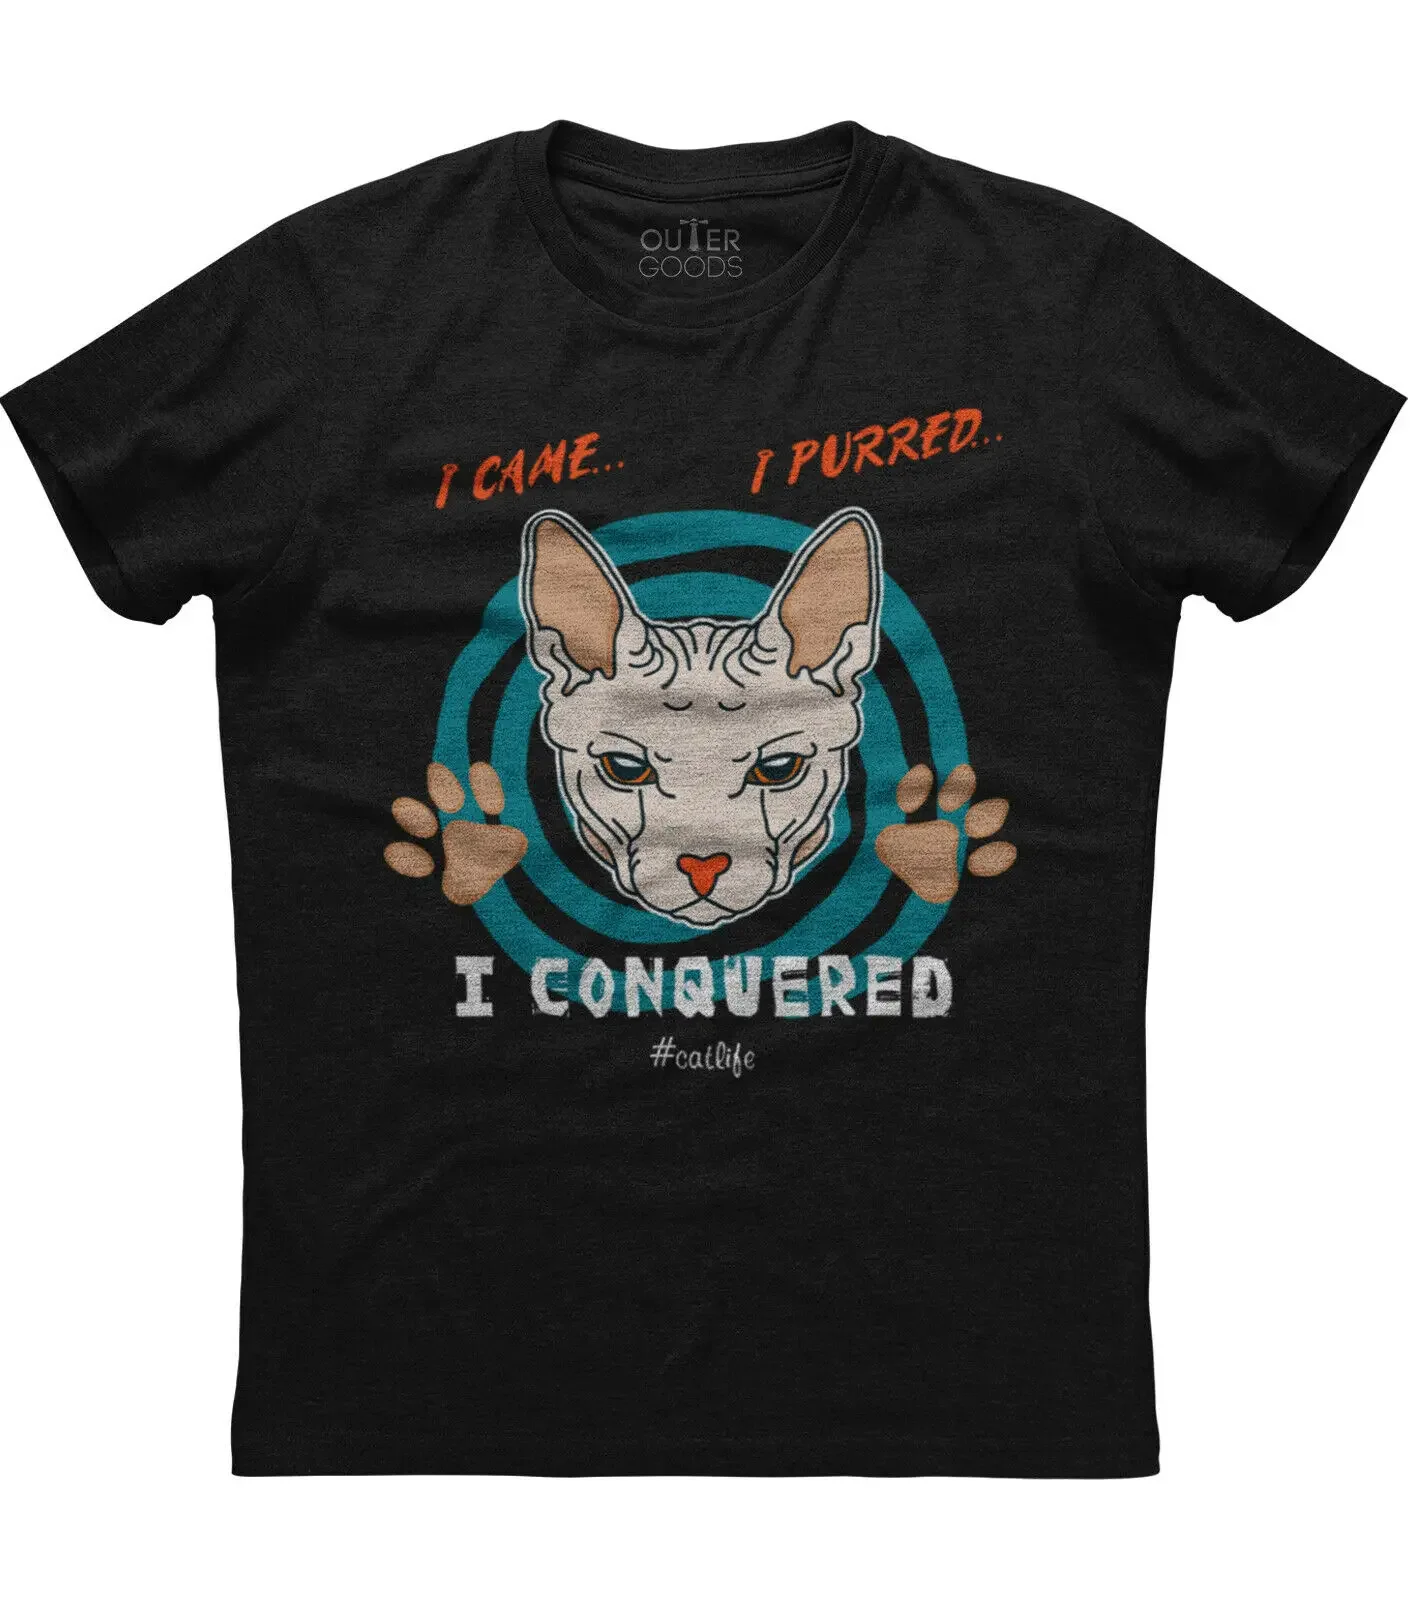 

I Came I Purred I Conquered. Funny Cat Graphic Phrase T-Shirt. Summer Cotton O-Neck Short Sleeve Mens T Shirt New S-3XL